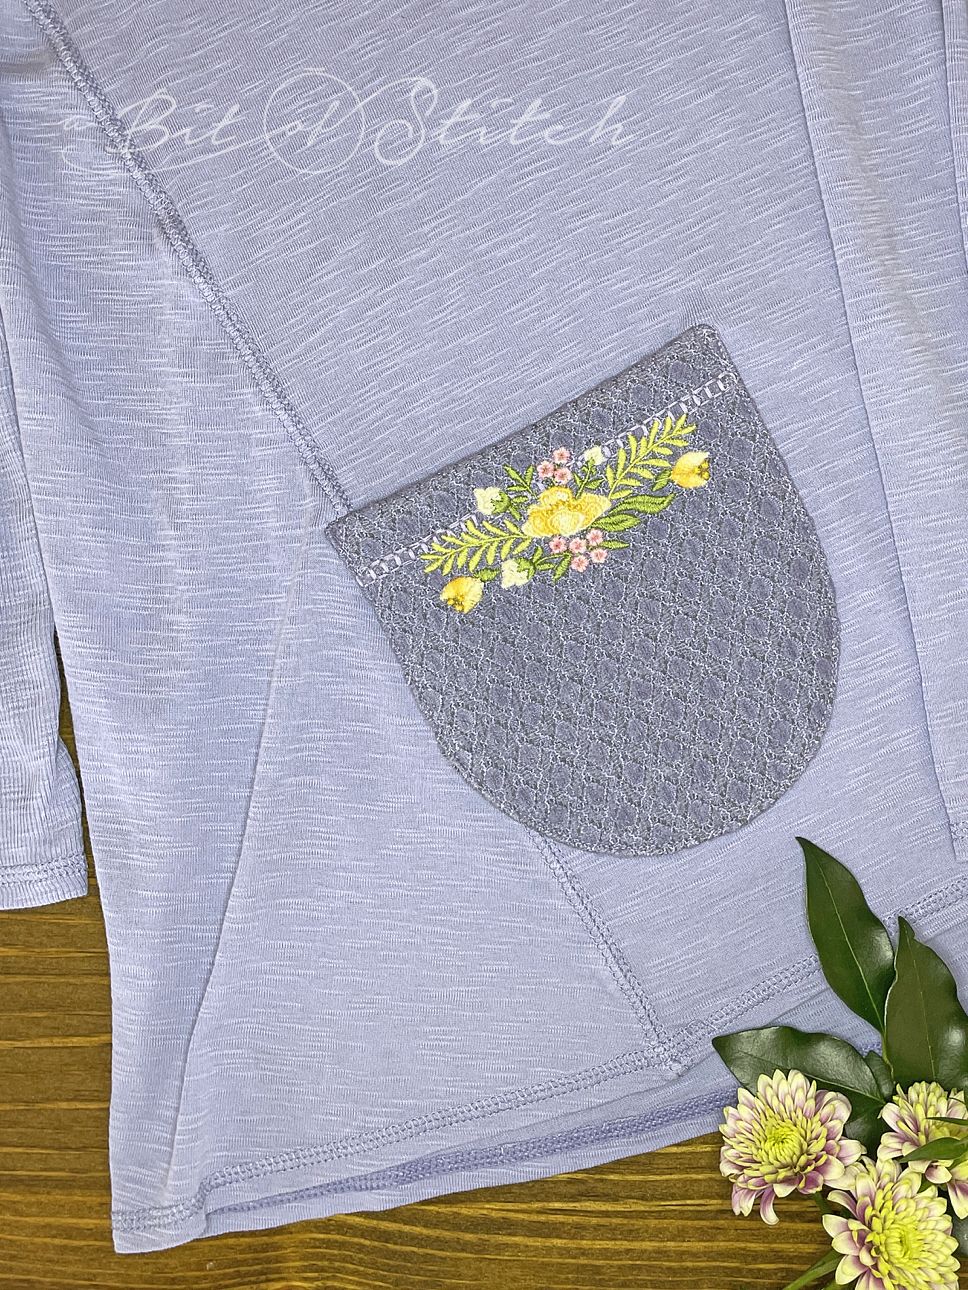 Made in the hoop pocket with elegant floral embroidery - Pretty Pockets machine embroidery designs from A Bit of Stitch